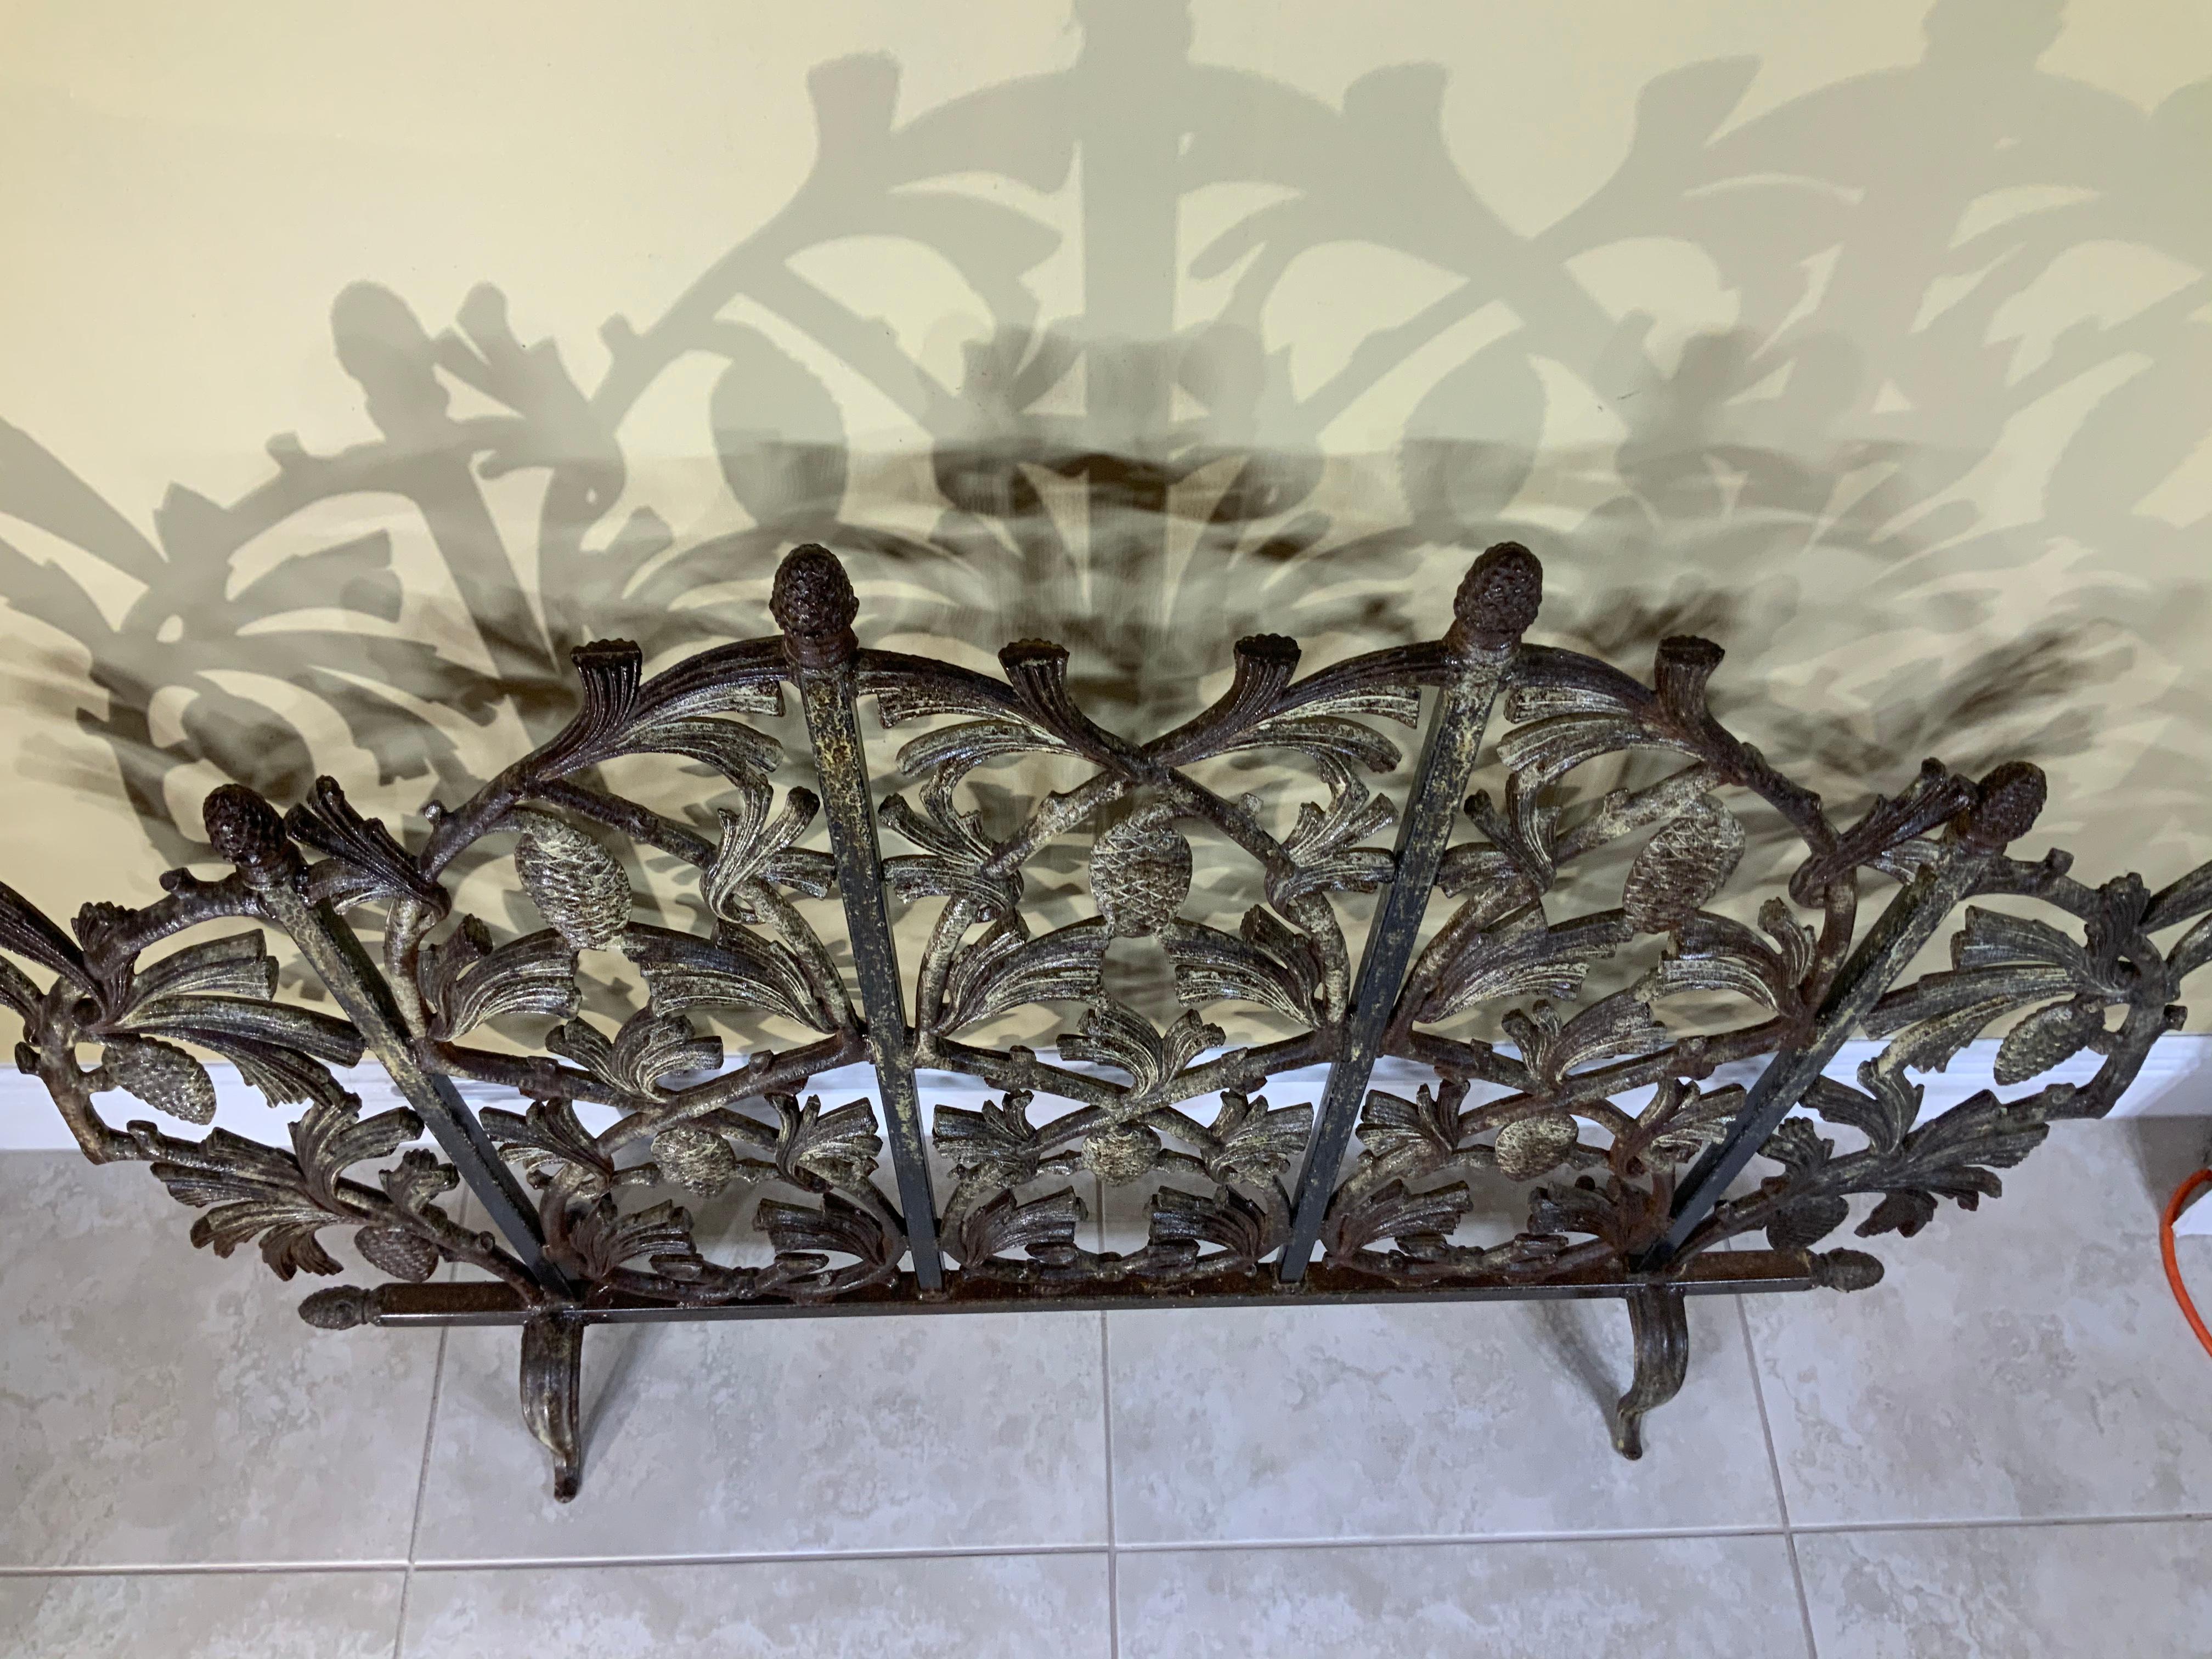 Exceptional fireplace screen made of cast iron with vines and pinecone motifs all around, beautiful snowy patina on one side, and rustic on the others. treated and sealed for rust, great decorative object of art for the fireplace.